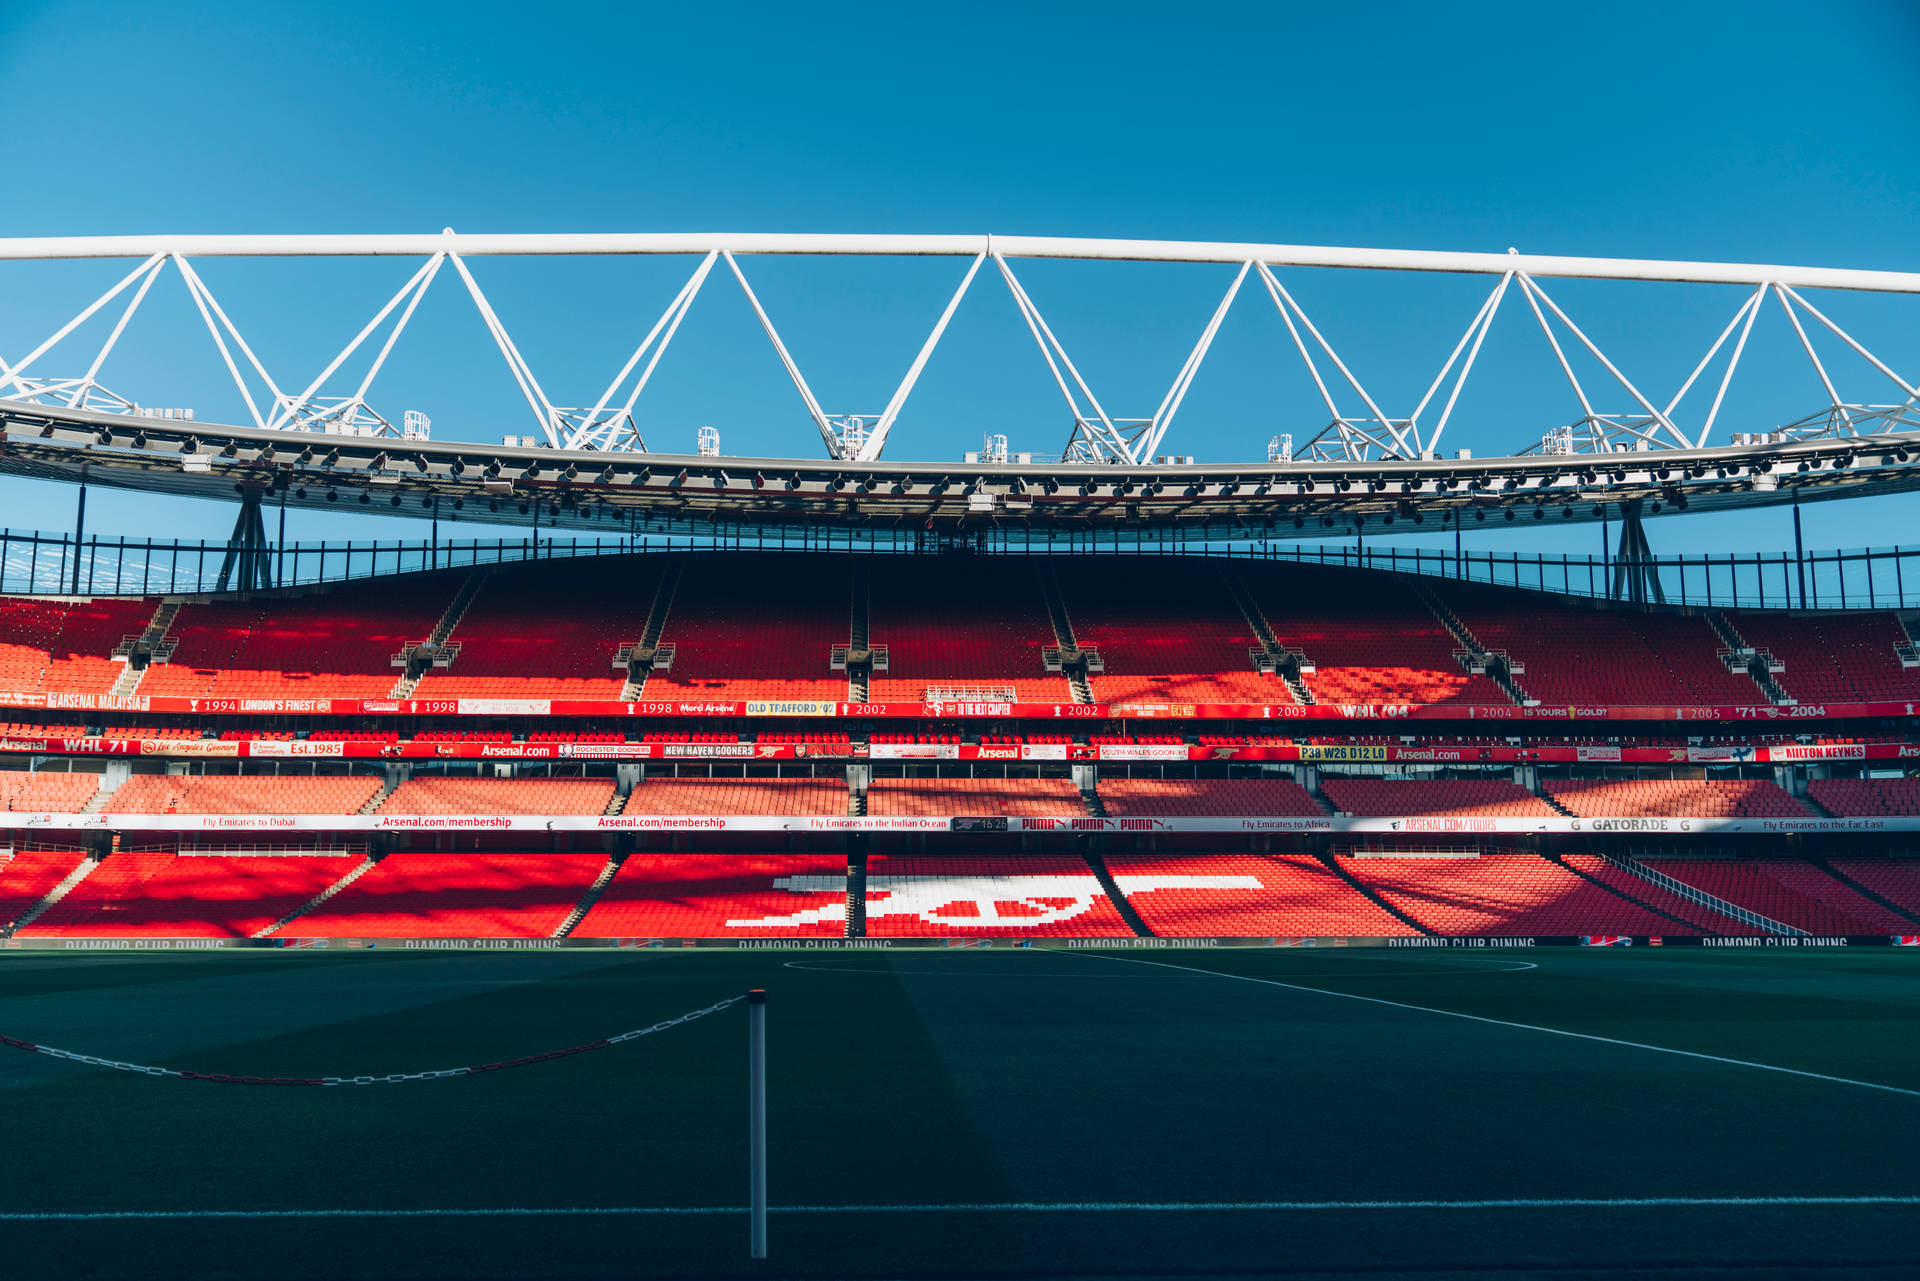 7952X5304 Arsenal Wallpaper and Background